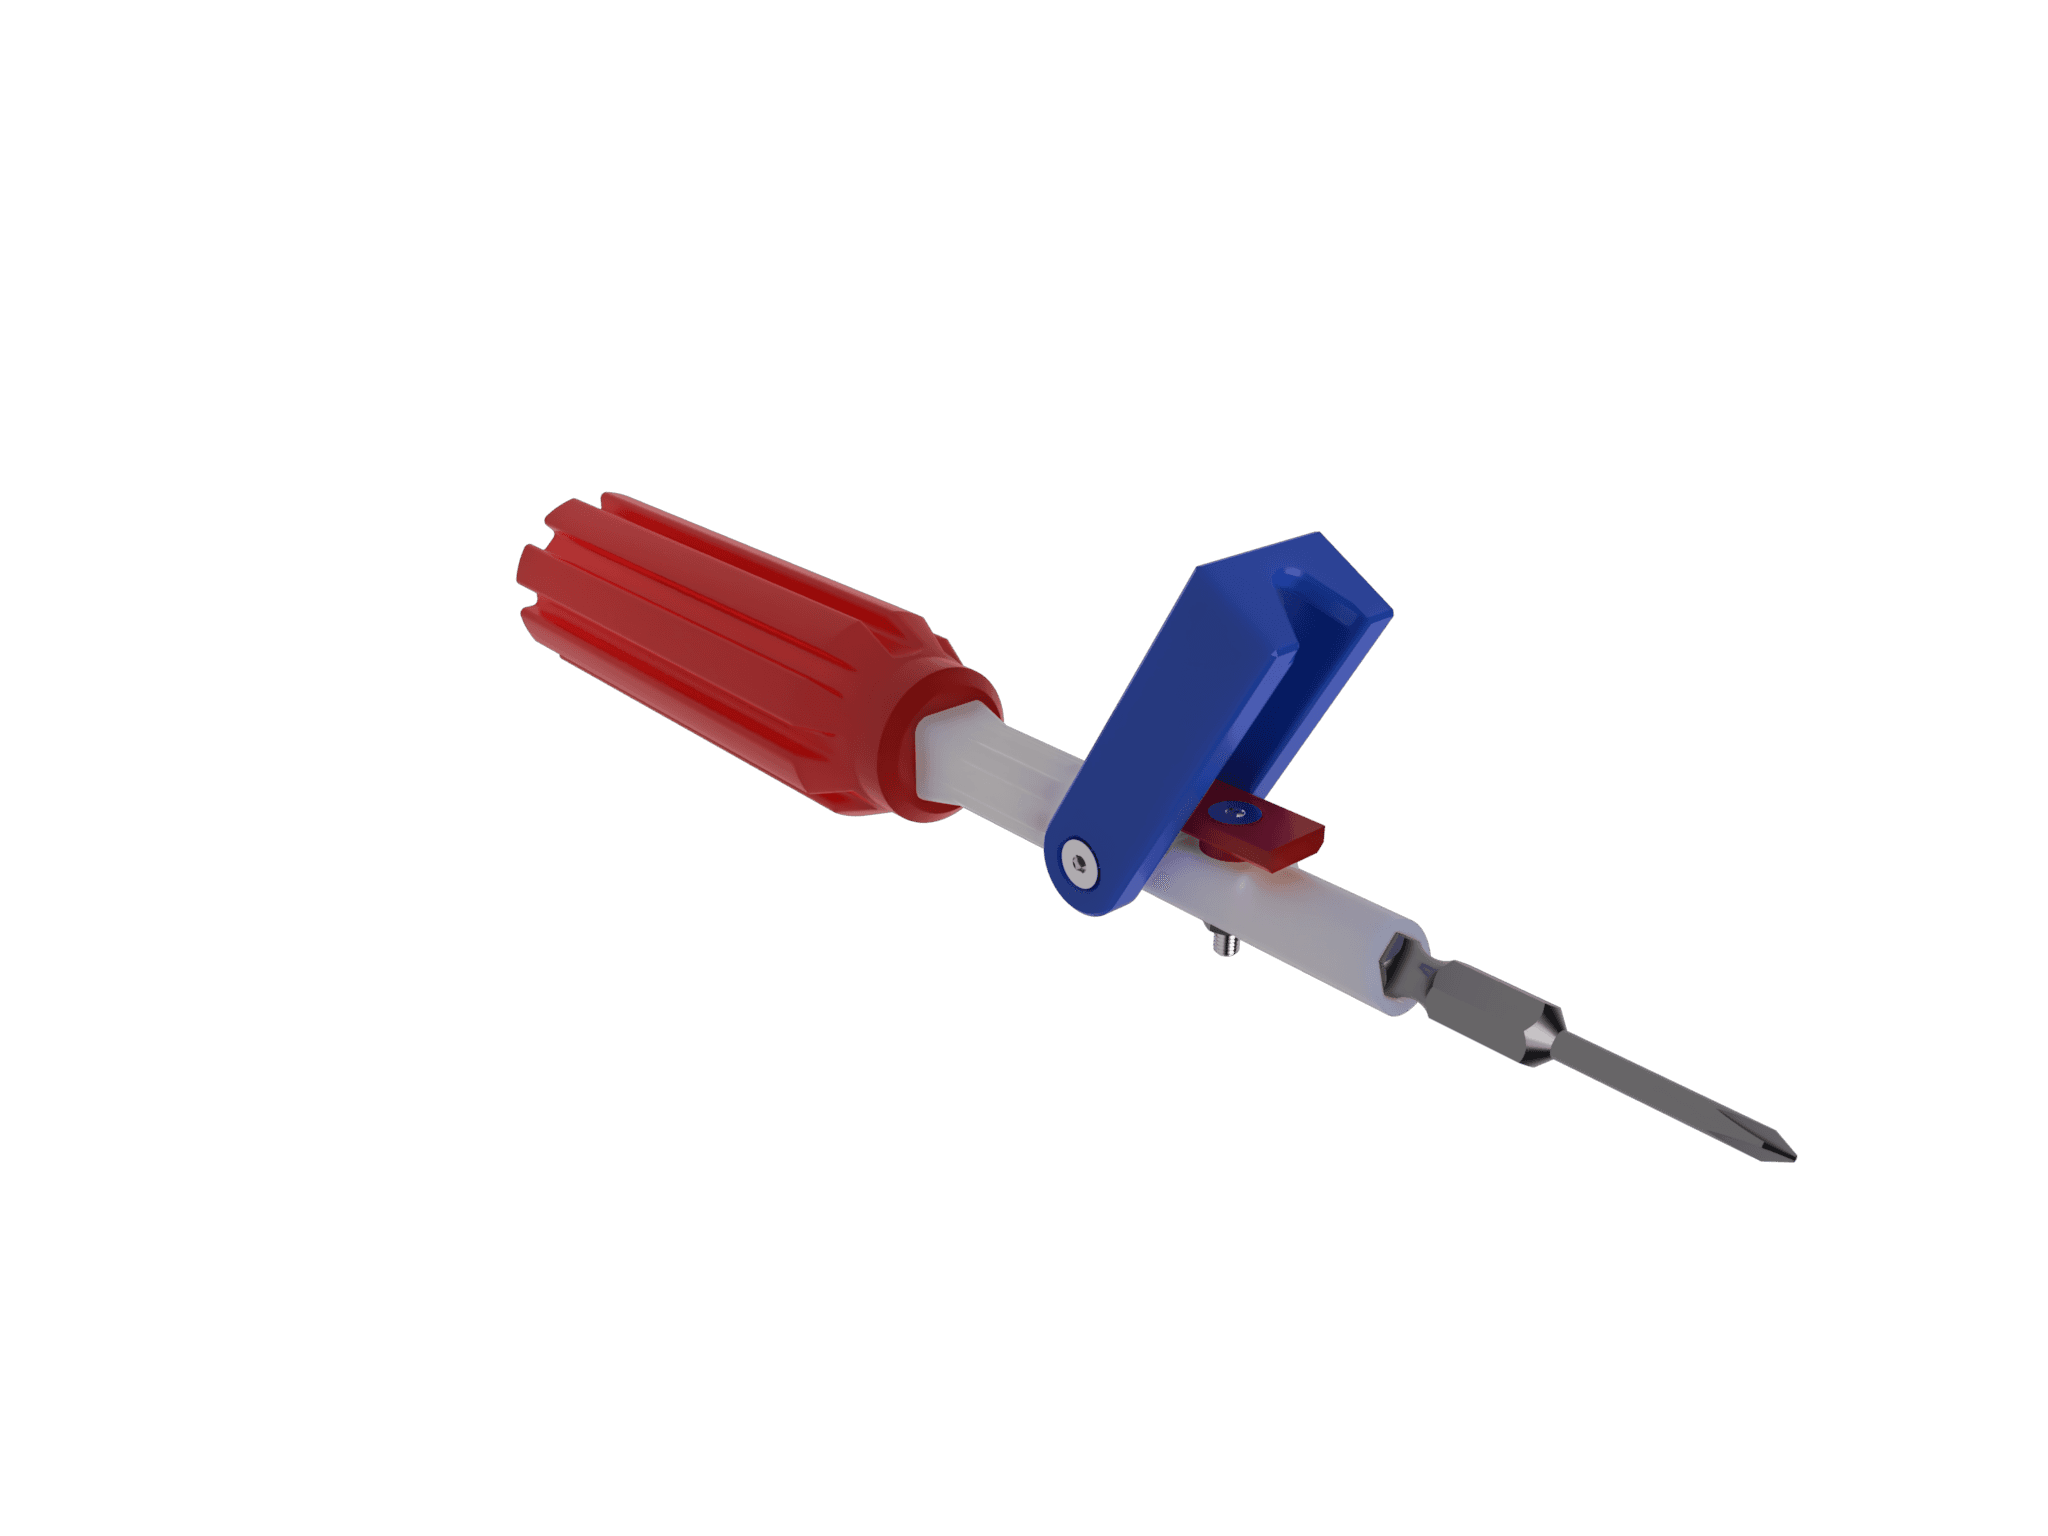 3D Printed Screwdriver (no magnets required!) 3d model